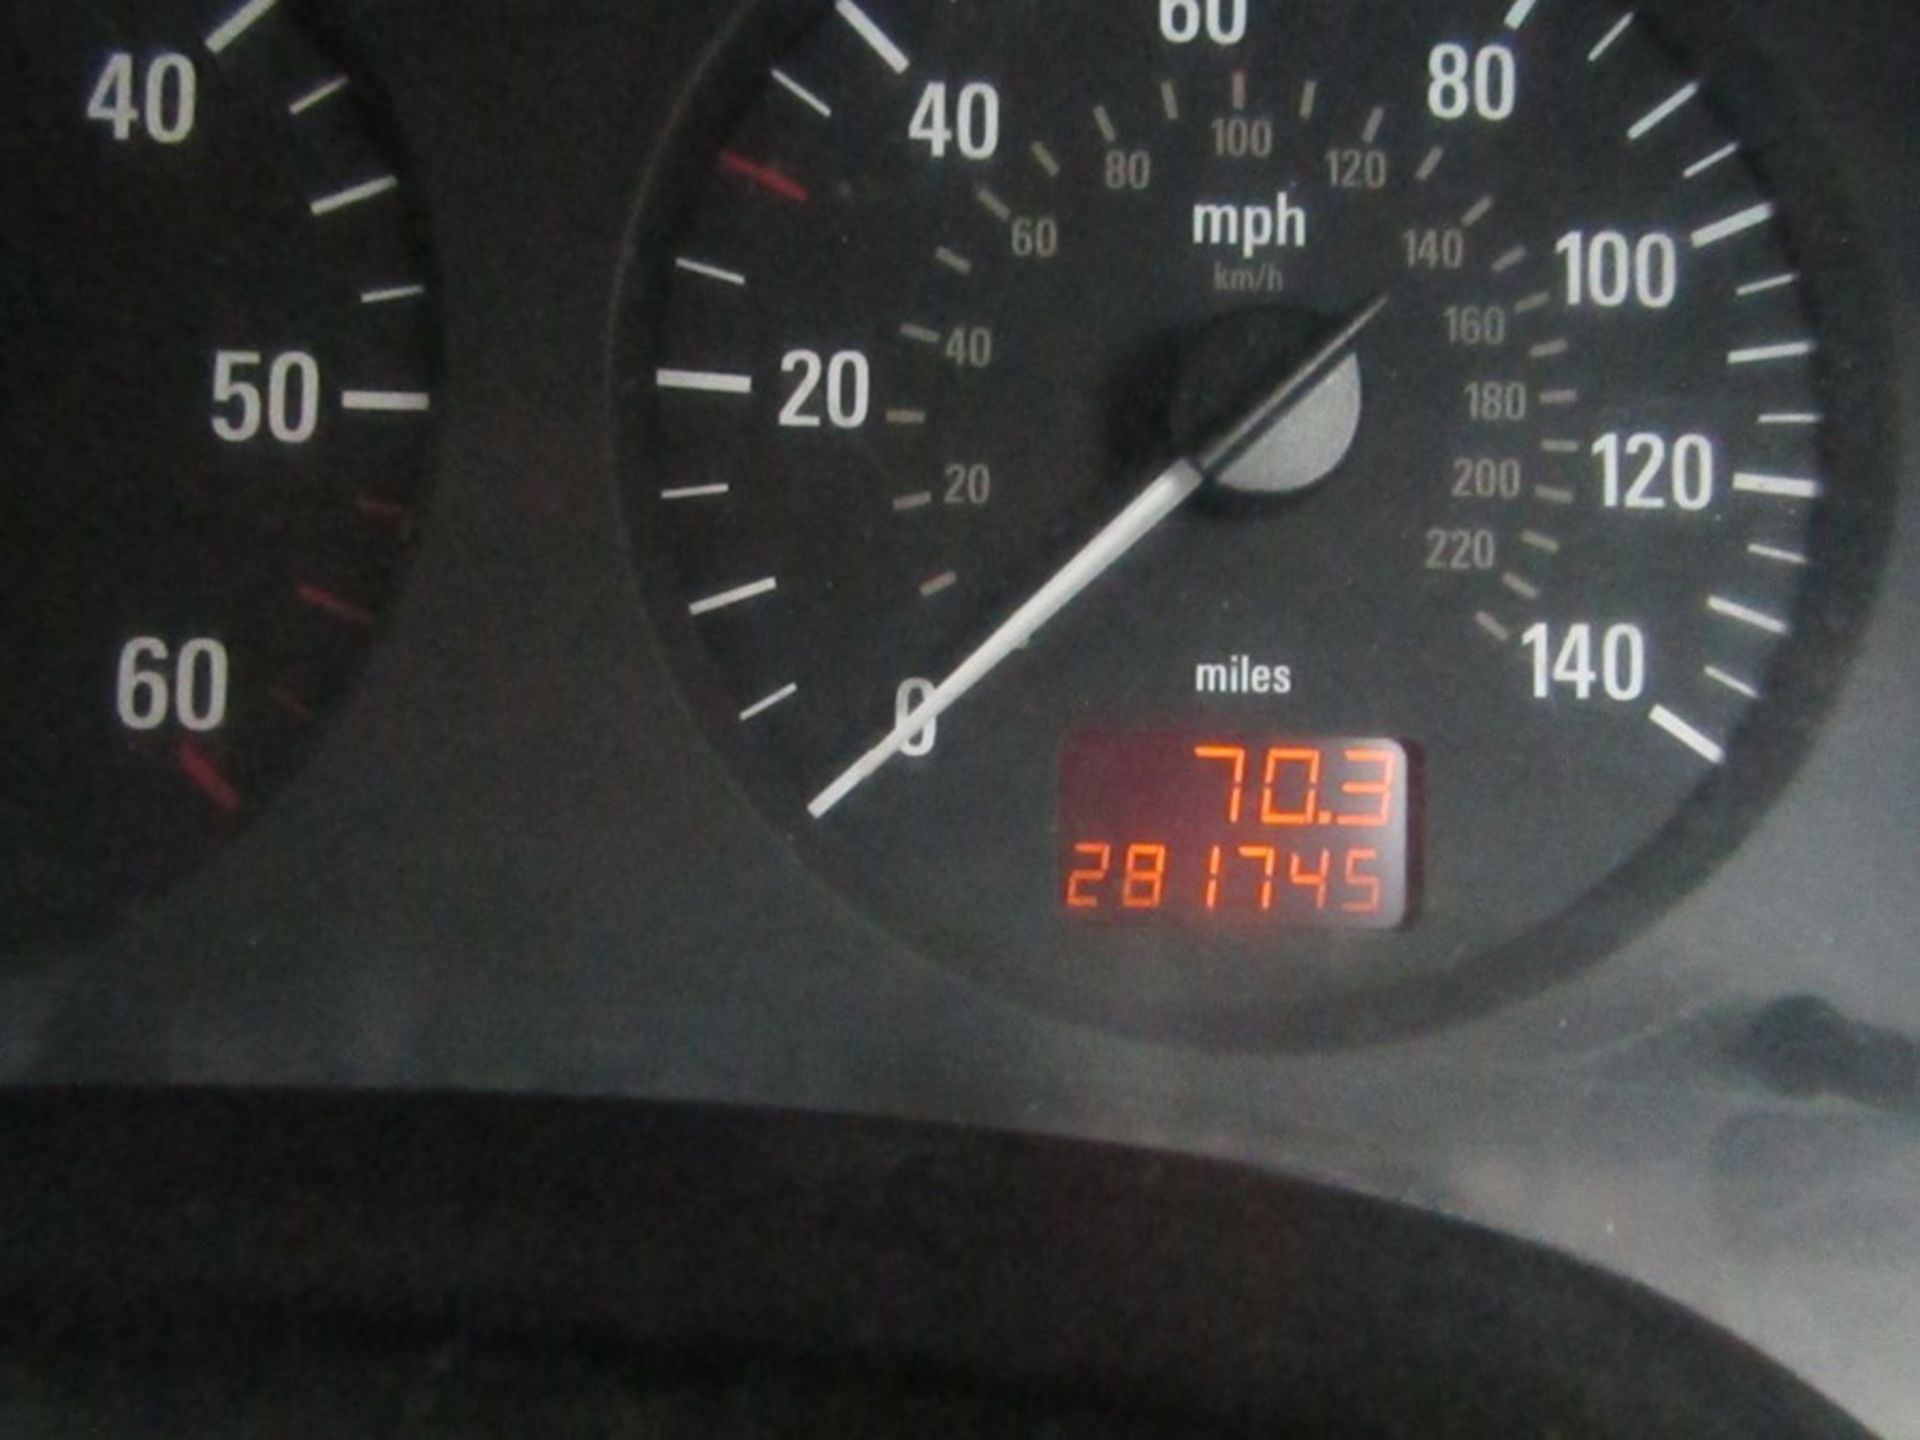 2003 Vauxhall Astra Van  LS DTI, 281,745 miles (unchecked), MOT until 07-02-2021, start and runs, - Image 16 of 18